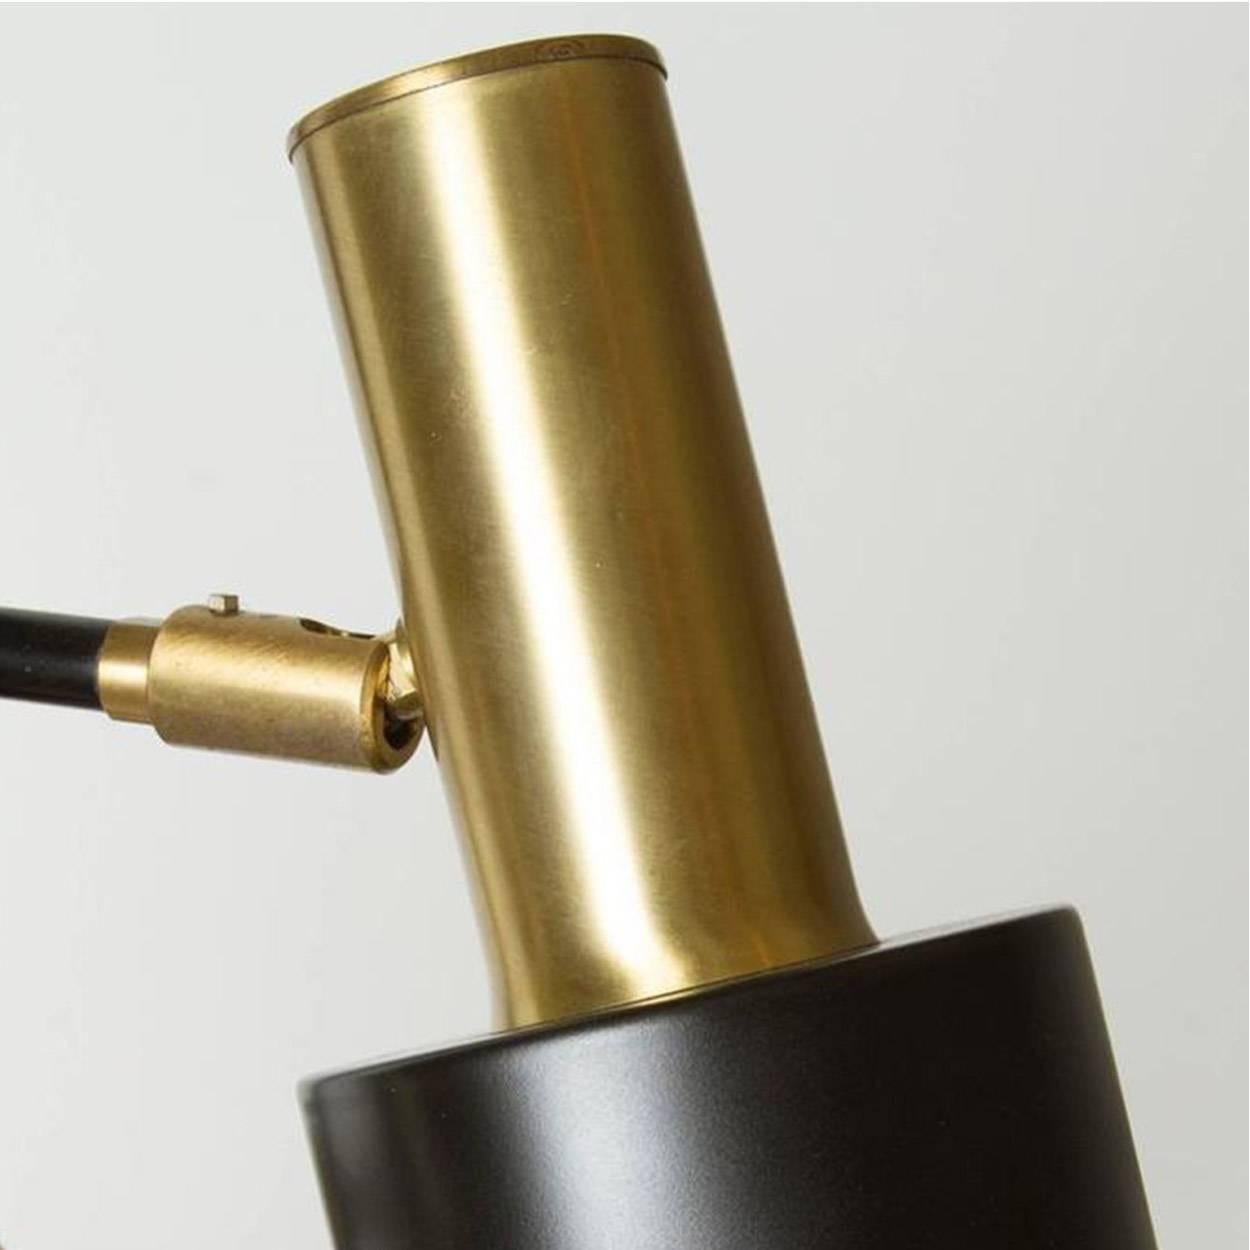 A three cone adjustable floor lamp designed by Jo Hammerborg for Fog & Mørup, Denmark, circa 1960s. Made of brass and black lacquered metal. The he light is iconic for Danish lighting design. A very warm light due to materials and color.

The lamp